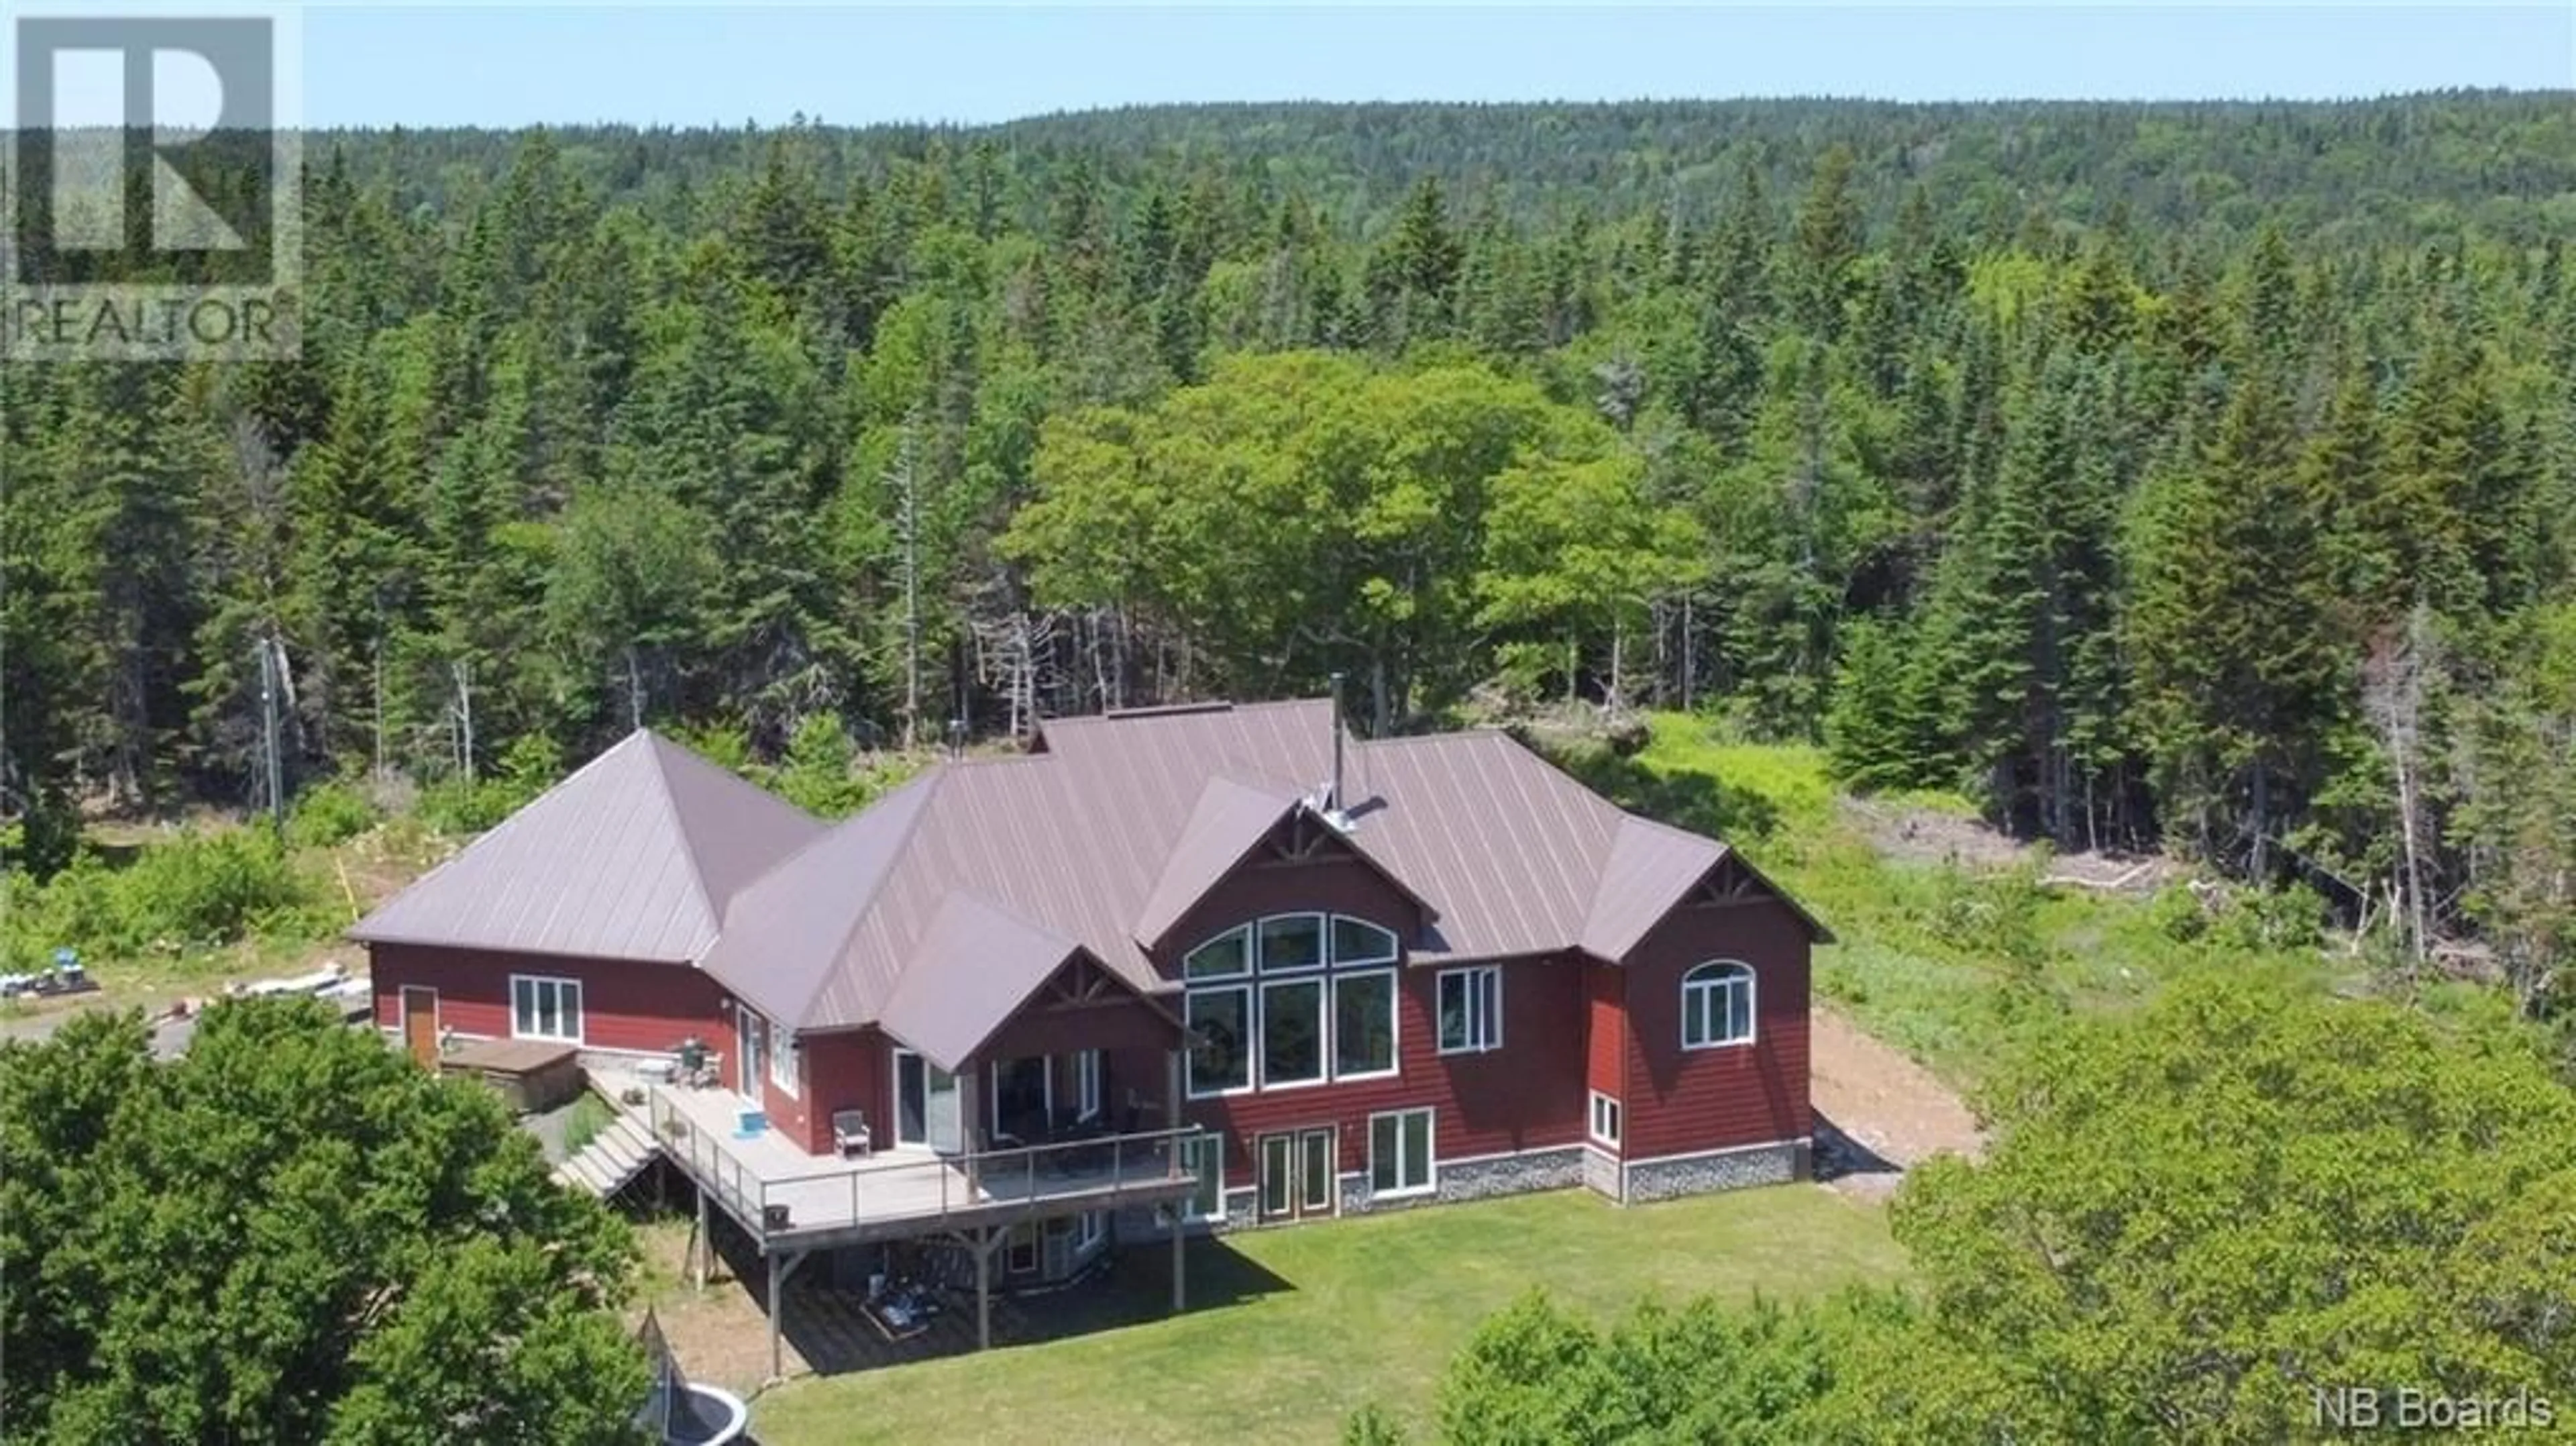 Cottage for 55 Bayview Heights, Grand Manan New Brunswick E5G1C1